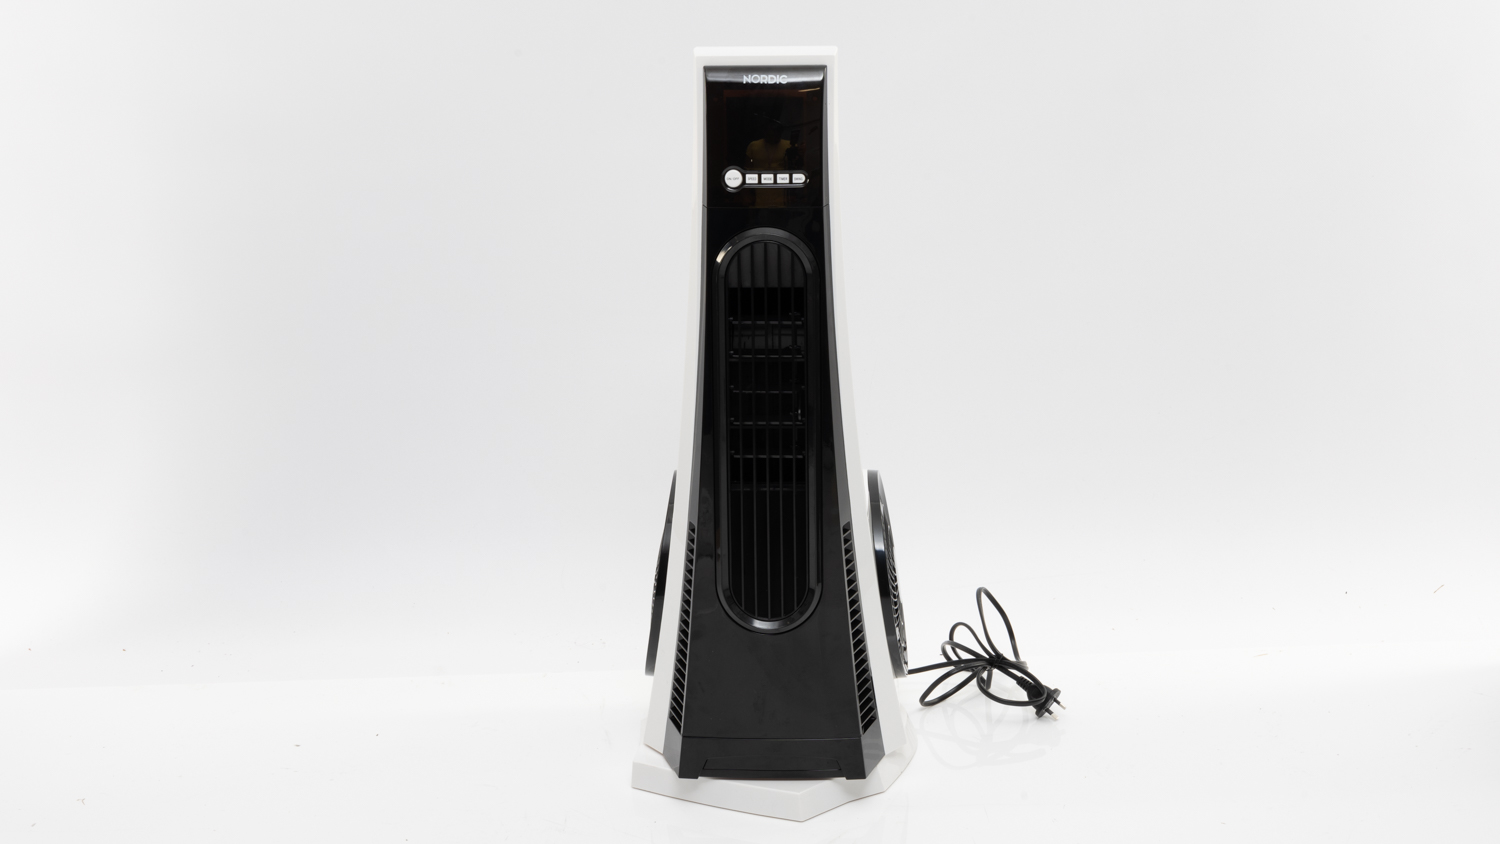 Nordic Turbo Tower Fan with Remote Control TF101N carousel image